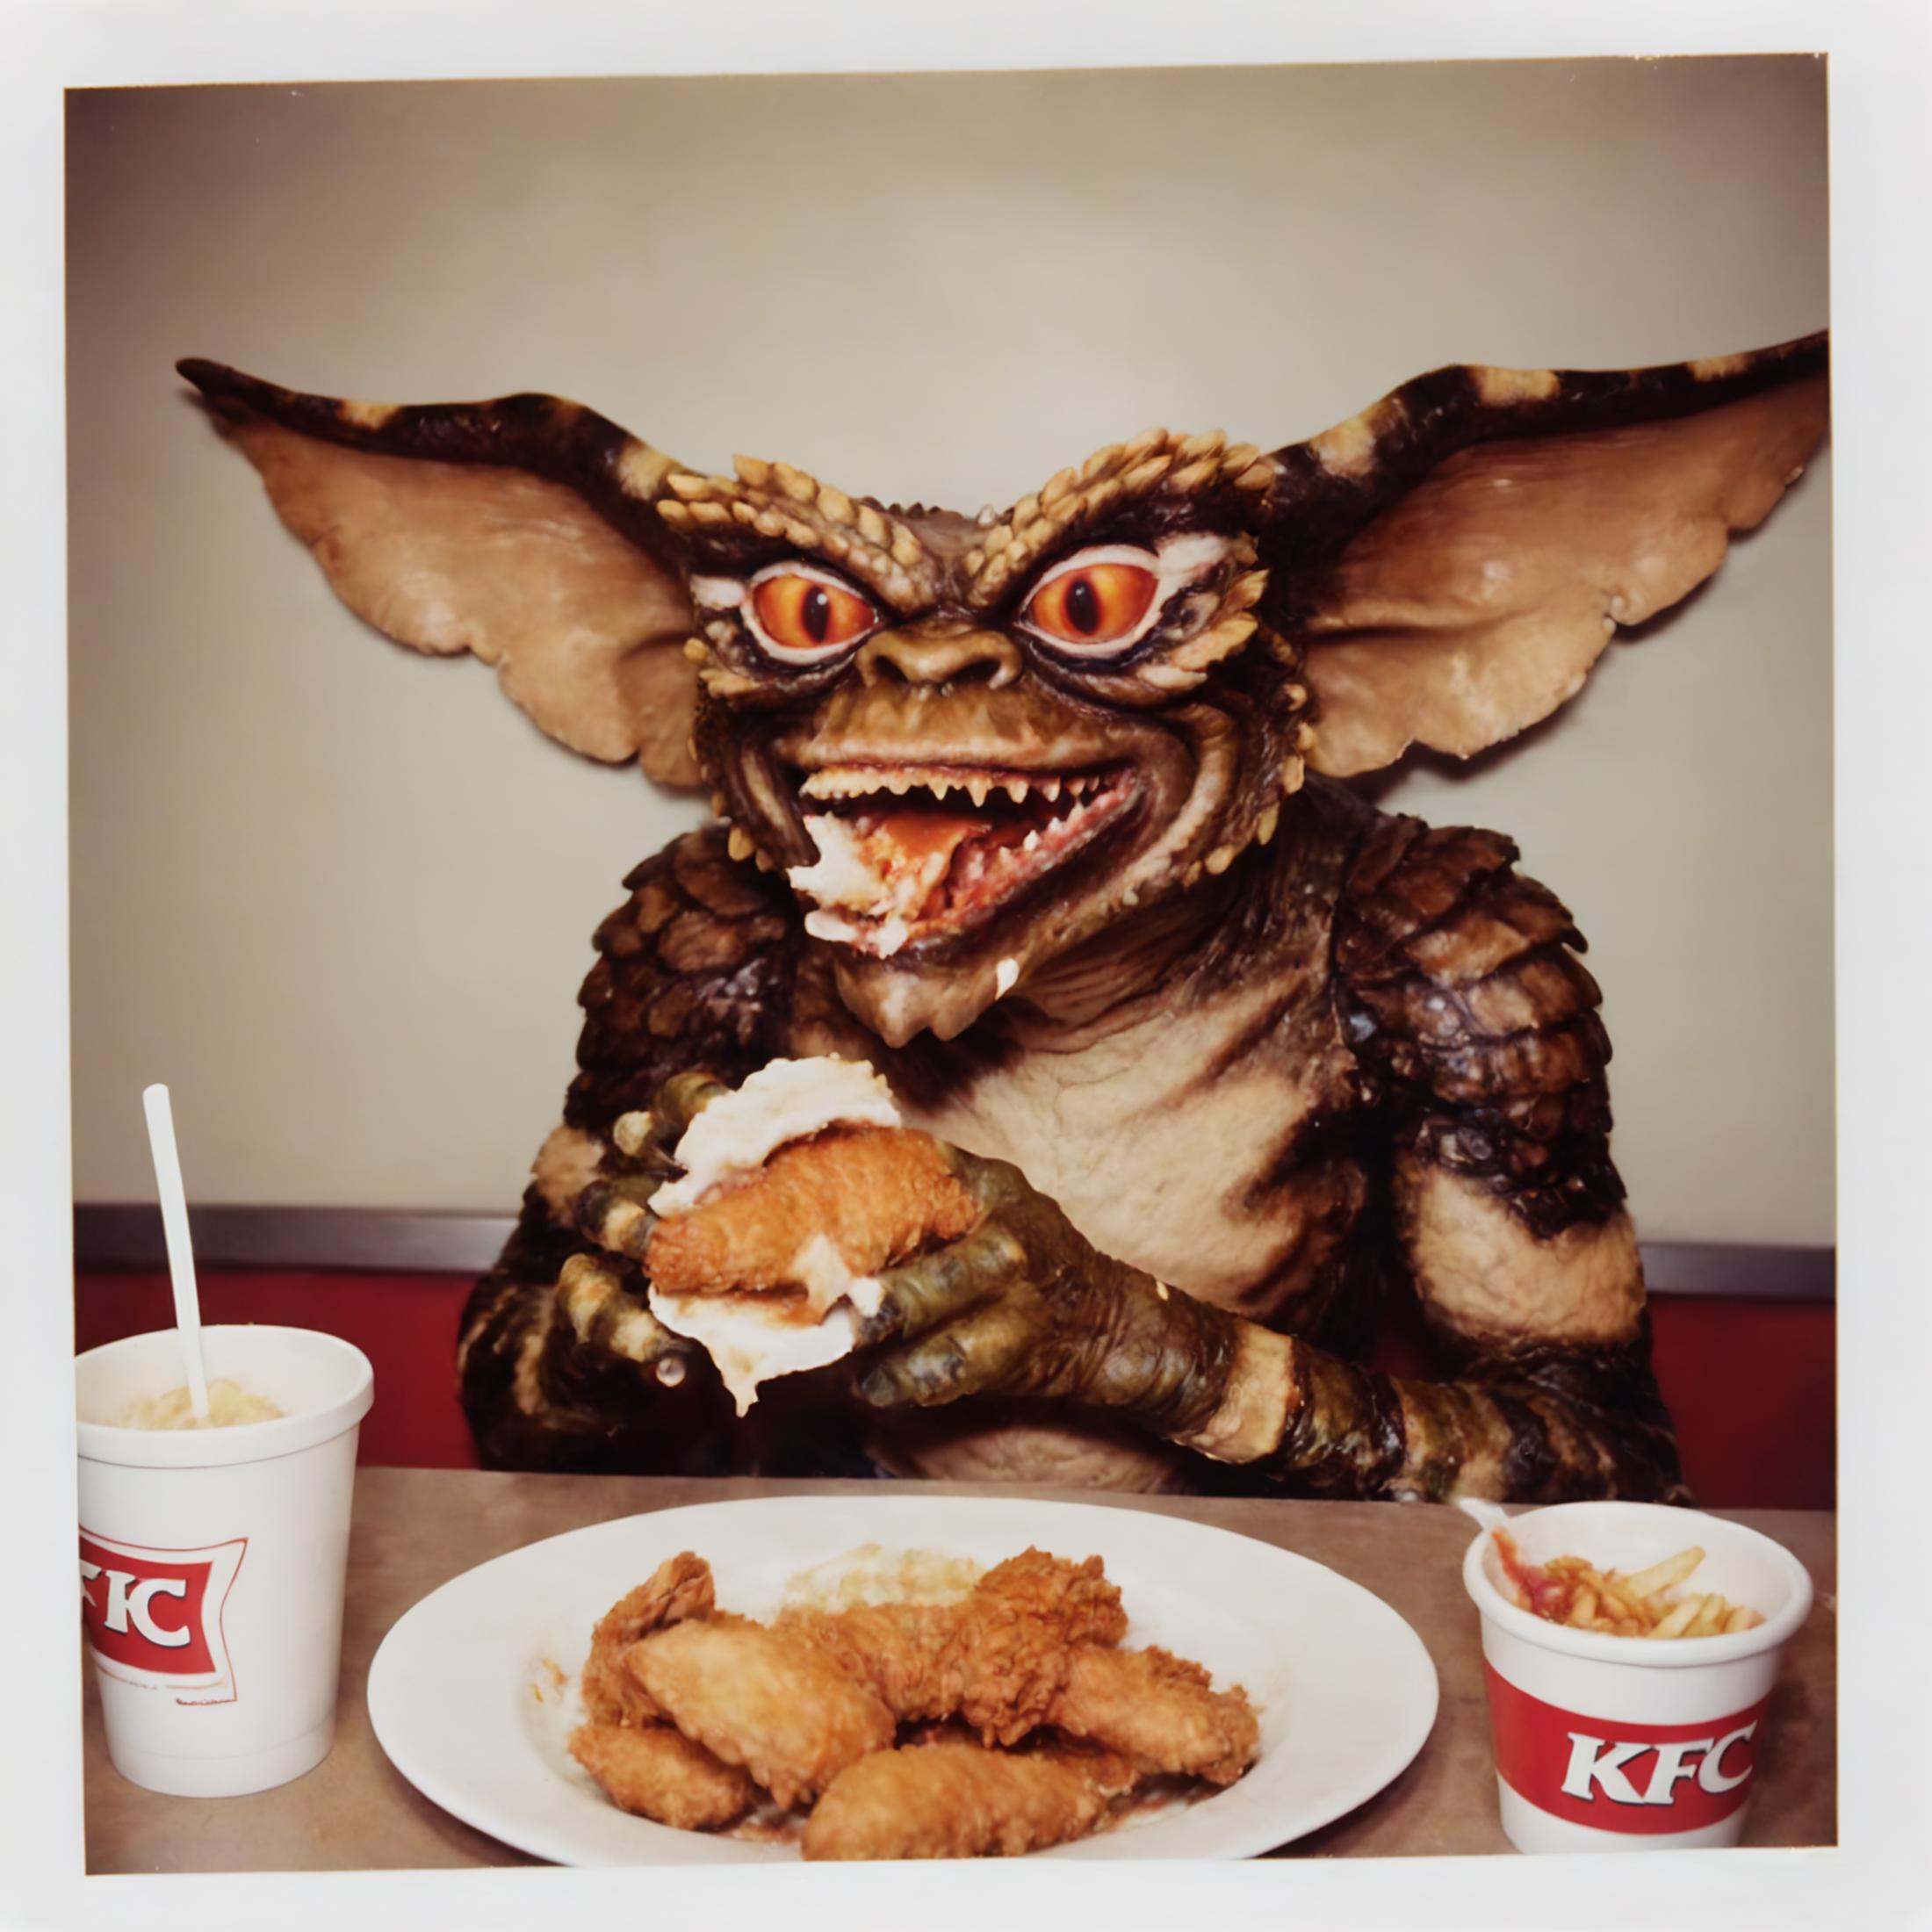 A monster with a fork in its mouth sitting at a table with a plate of fries and a drink.